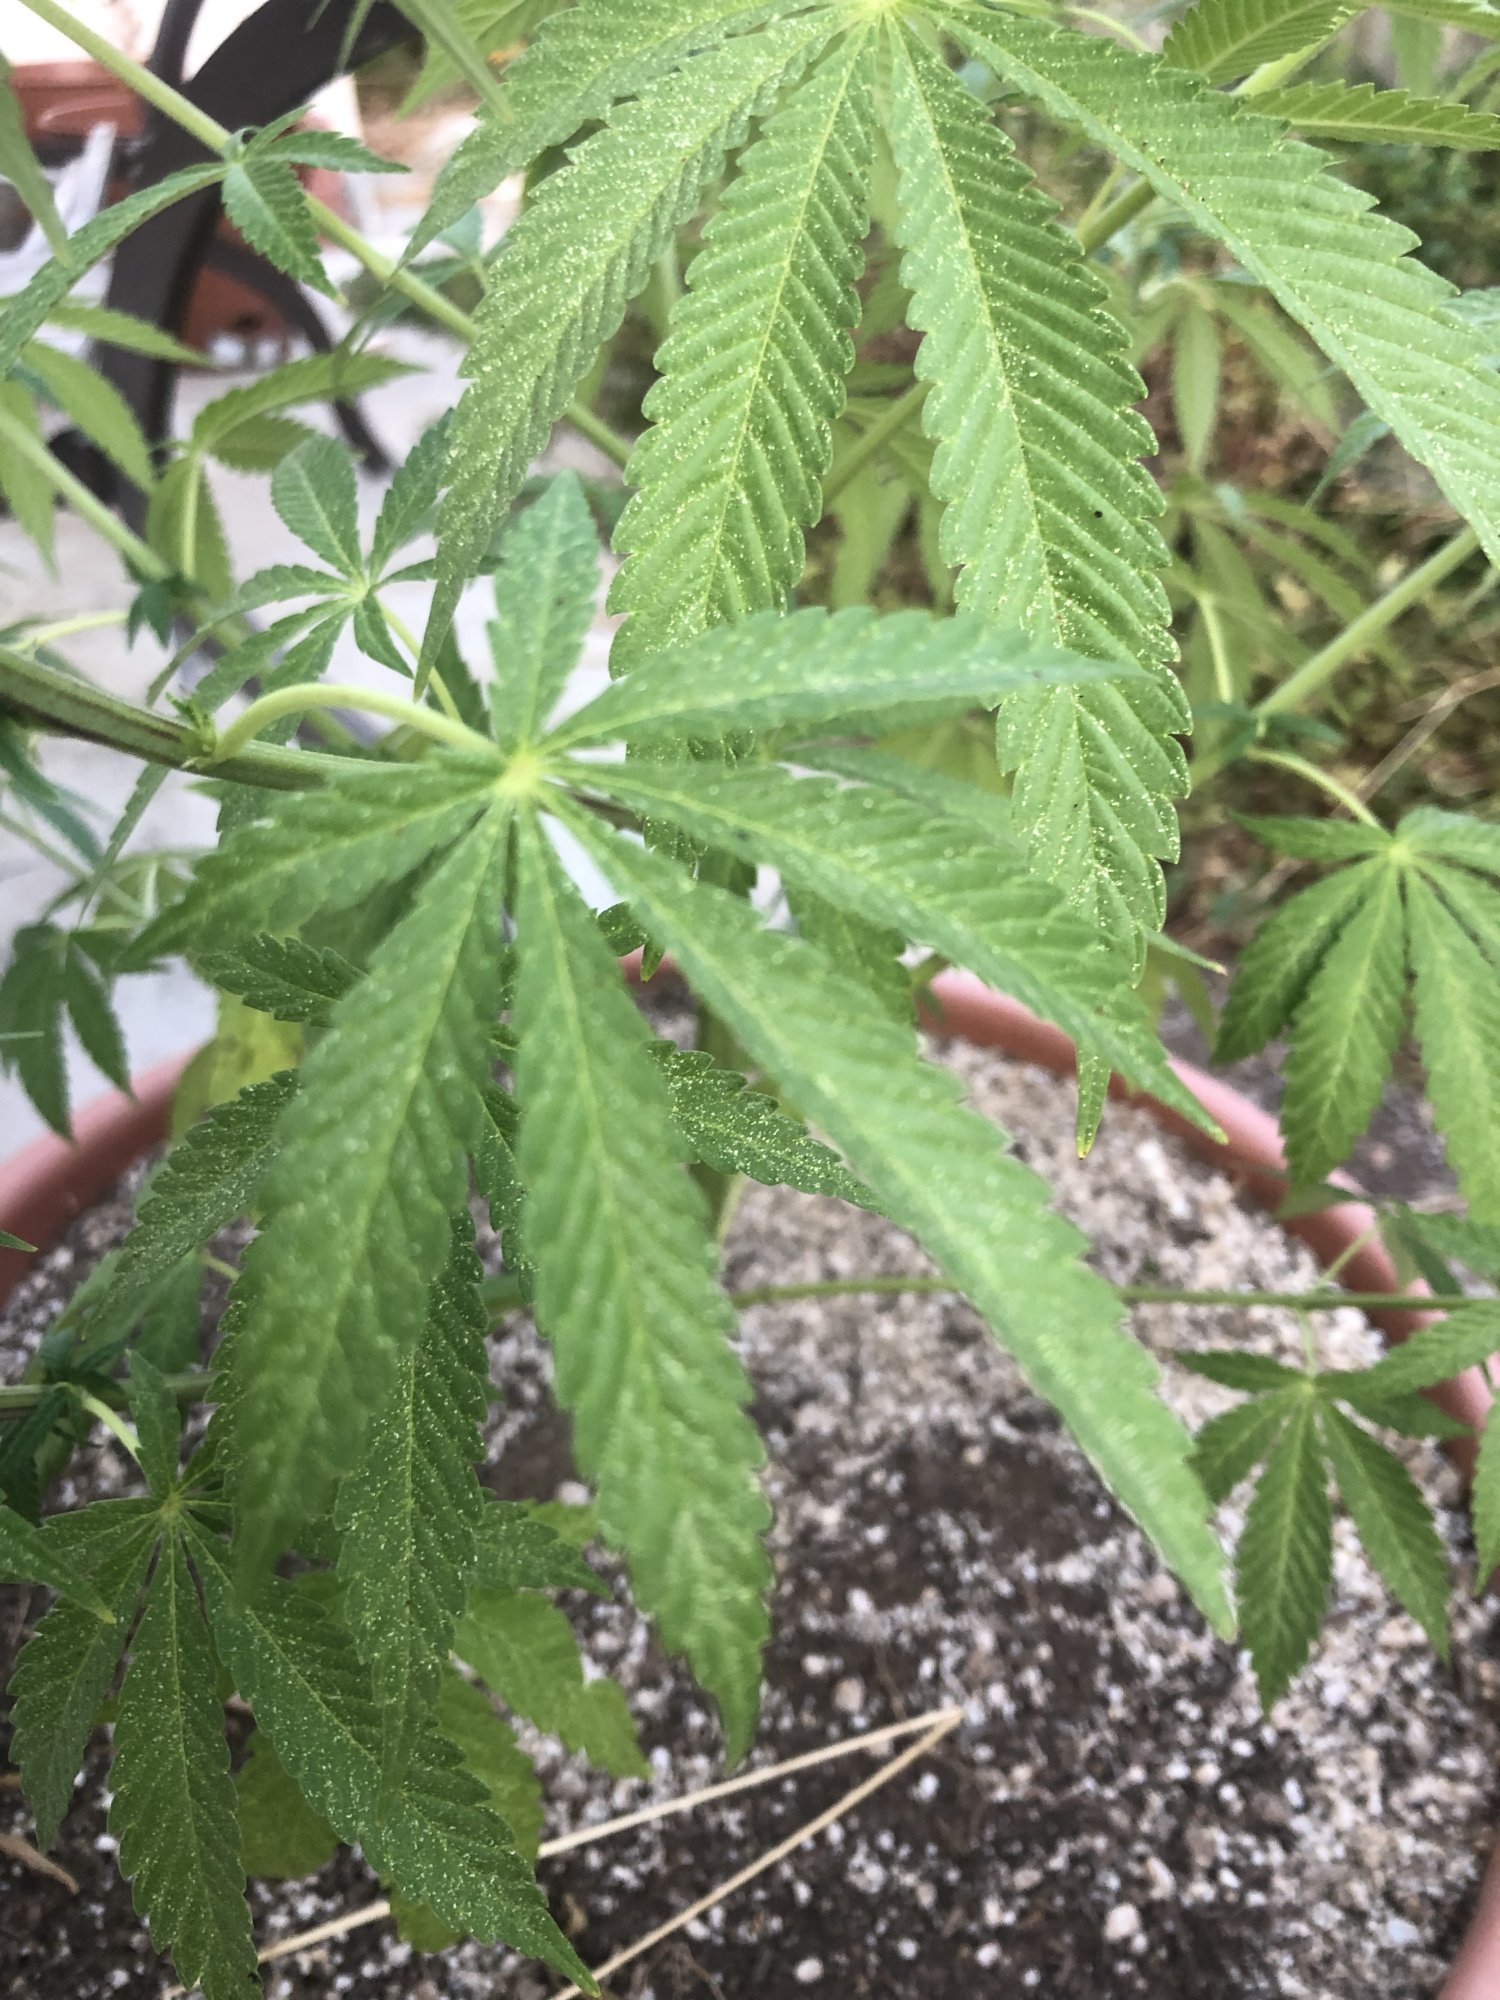 White spots pests or nutrient deficiency 2